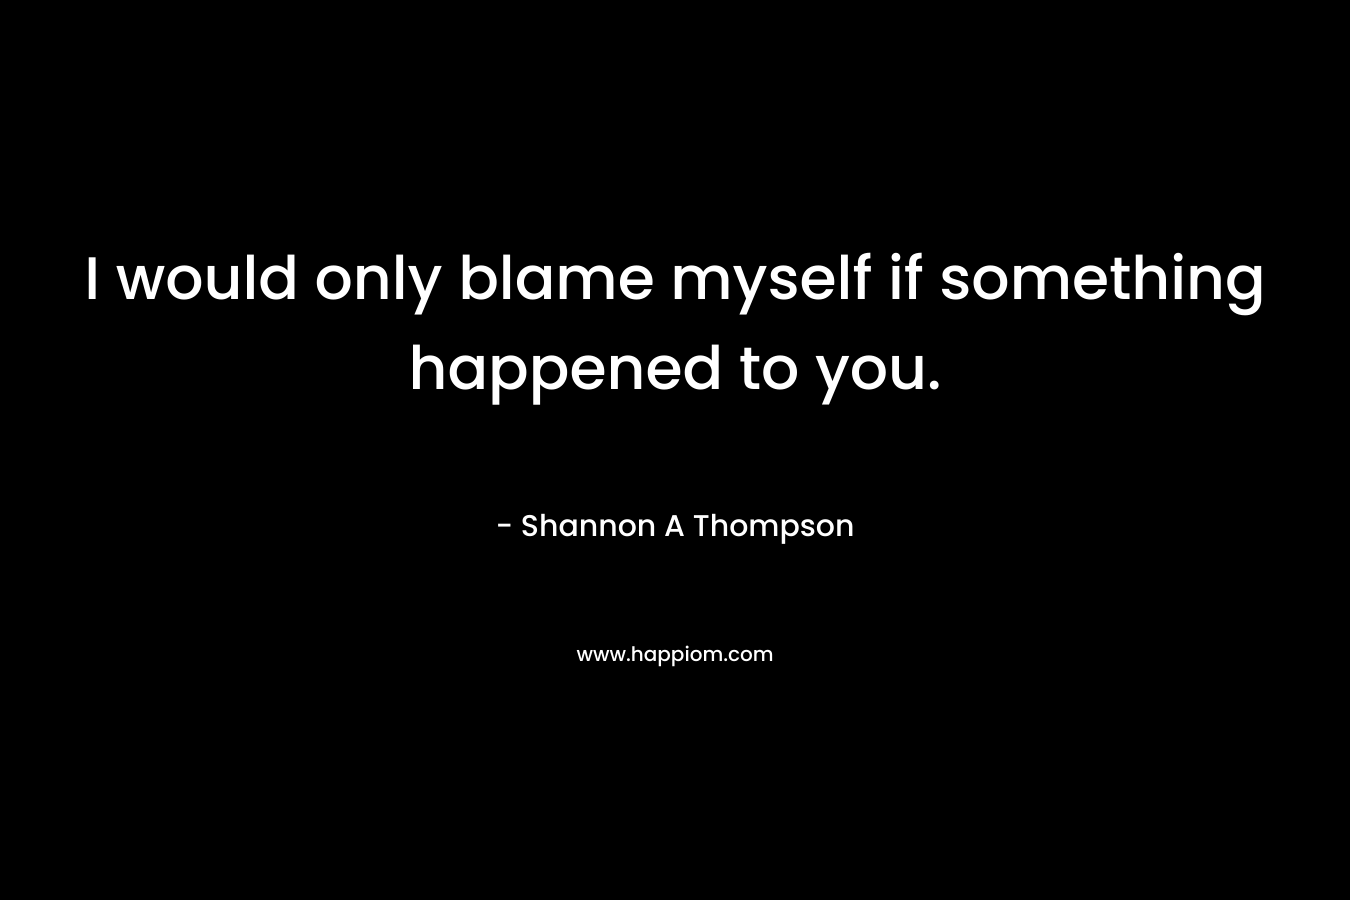 I would only blame myself if something happened to you.